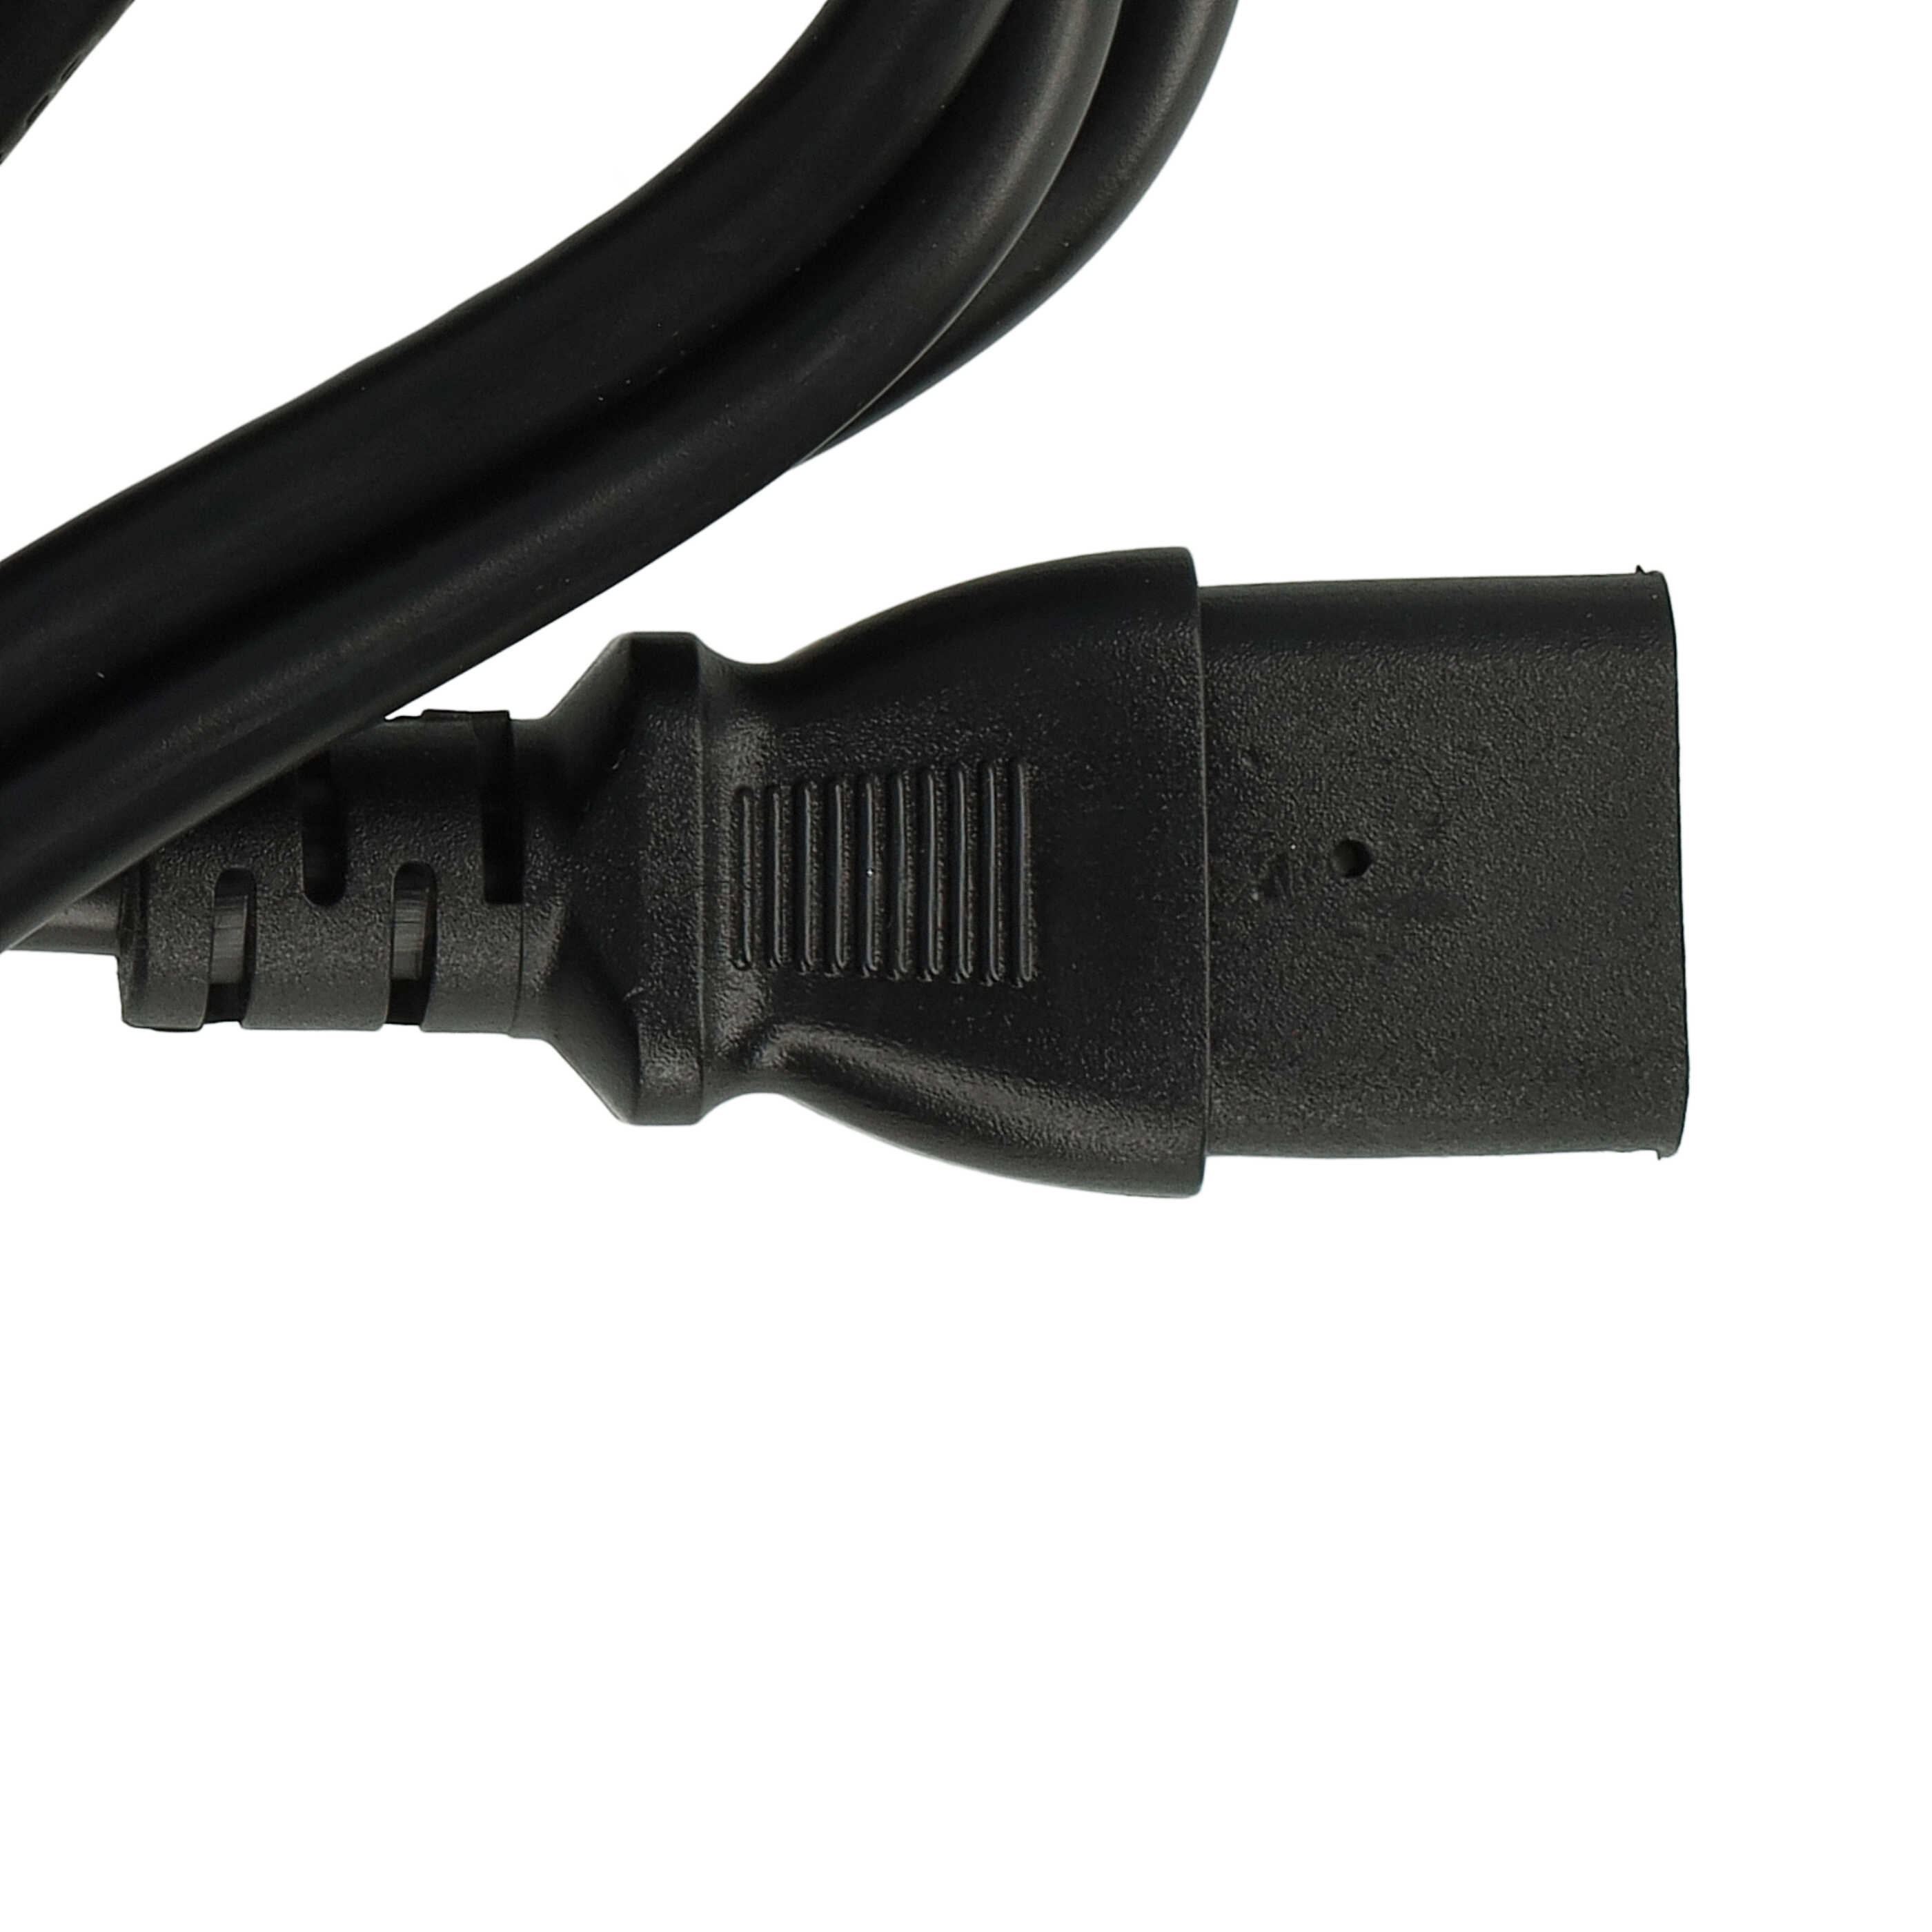 C13 Power Cable Euro Plug suitable for Devices e.g. PC Monitor Computer - 1.2 m